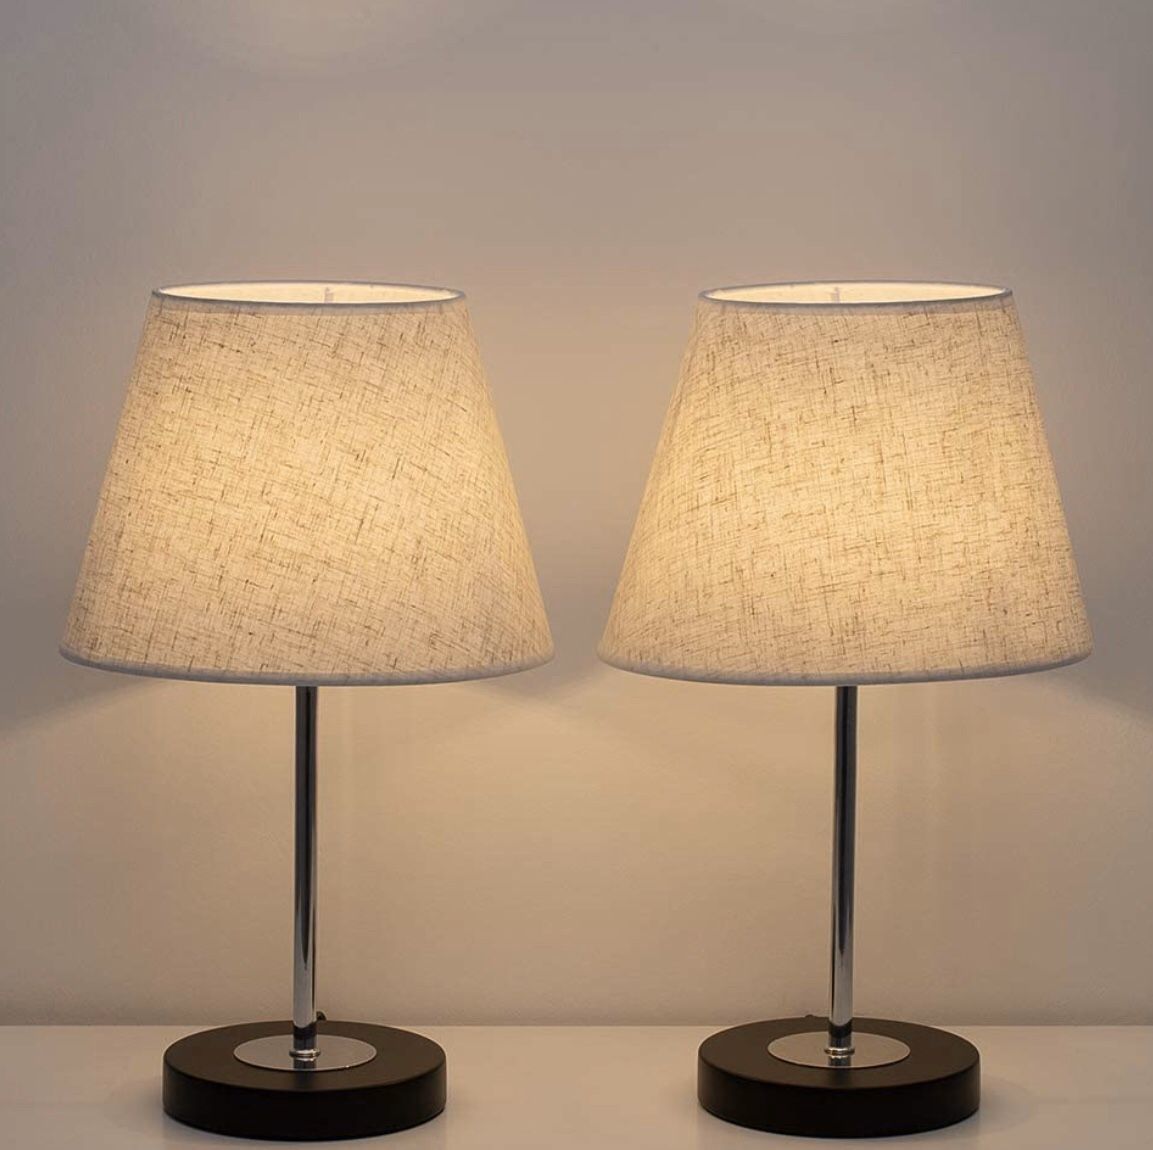 Pair of Table Lamps Bedside Desk Light Shade